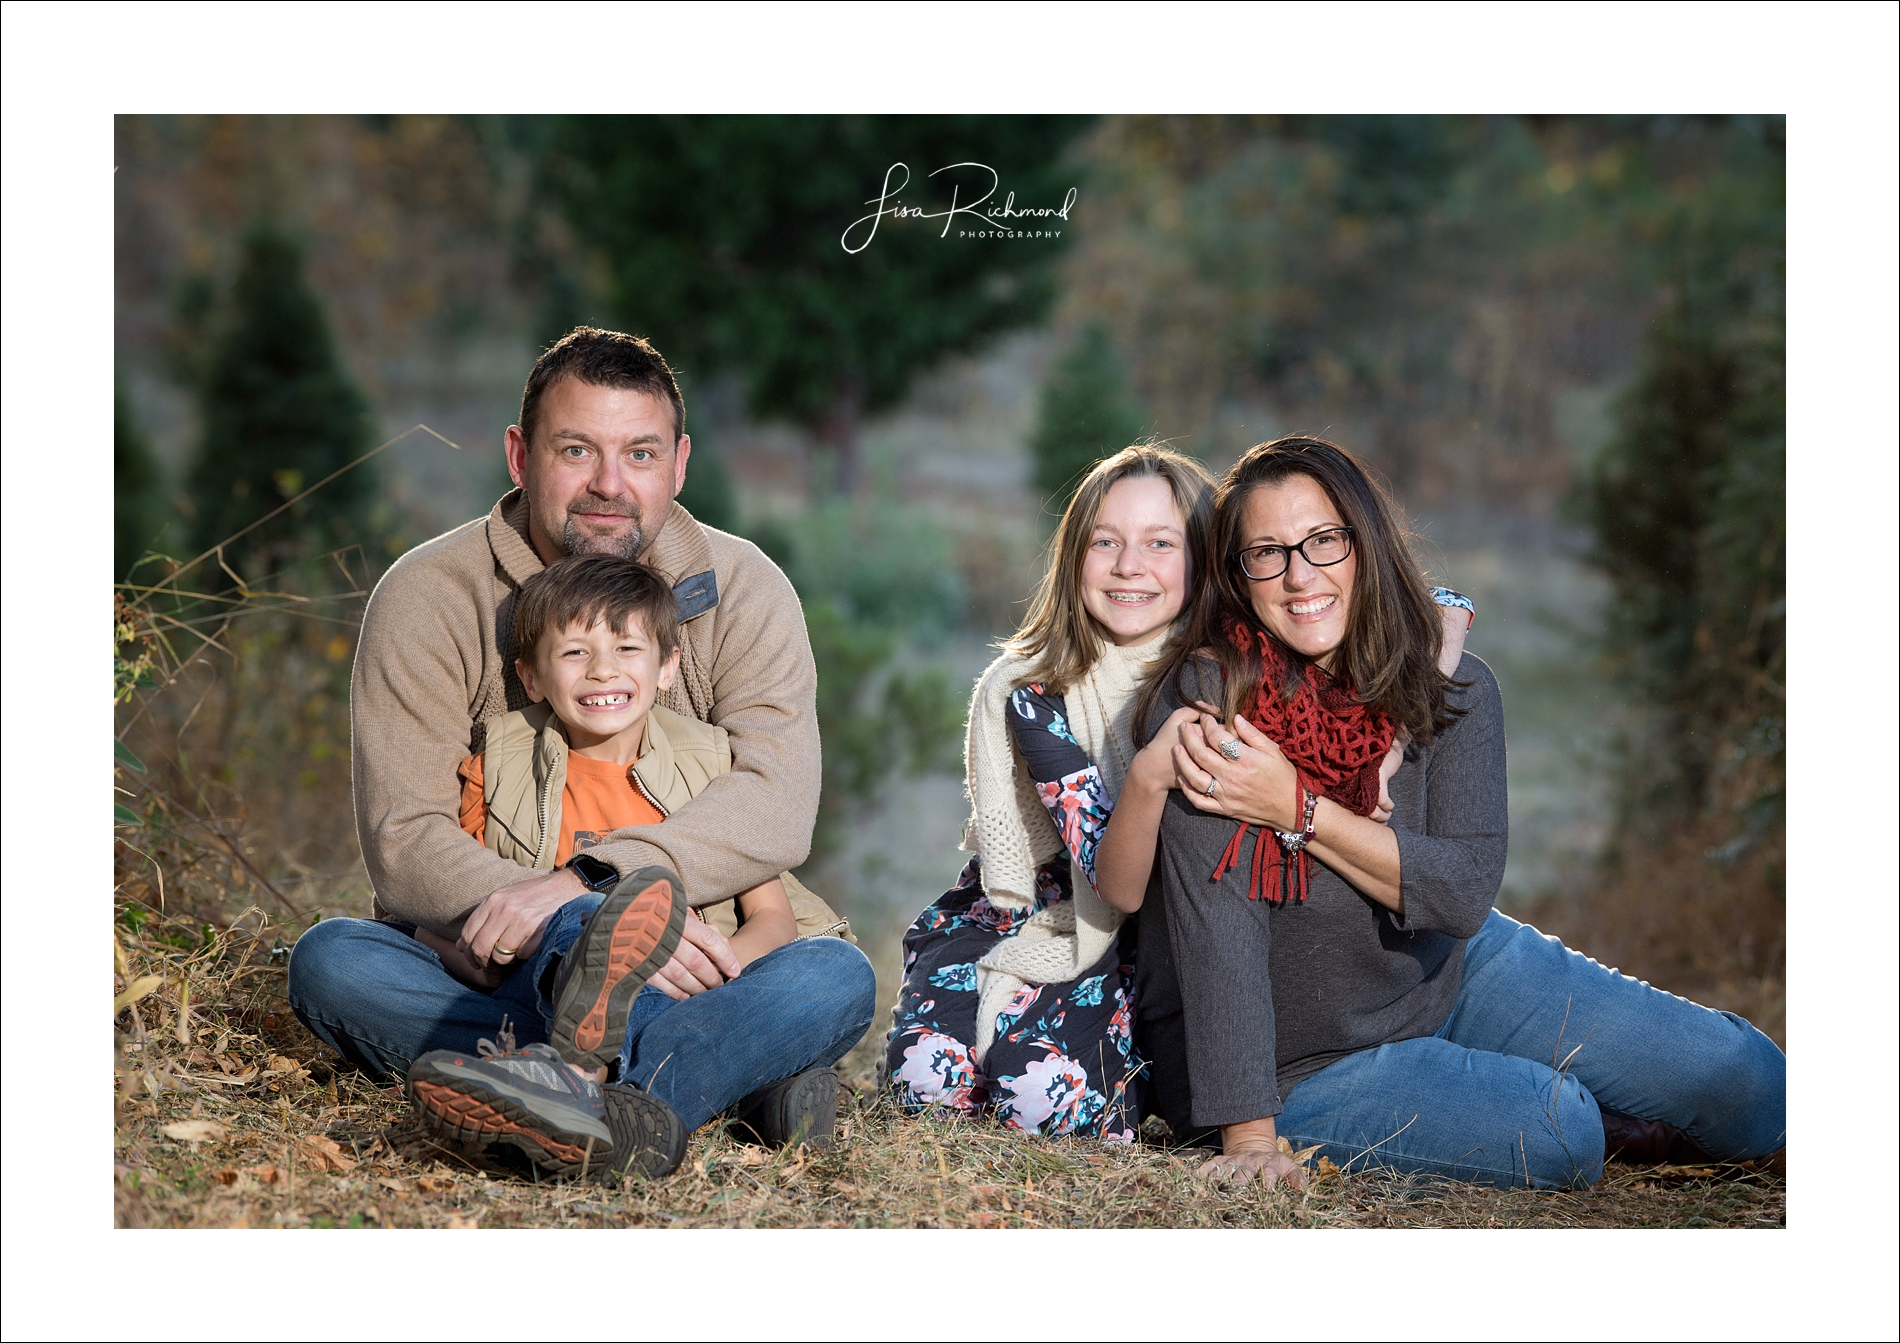 The McDaniel Family 2019- Some families just have it!